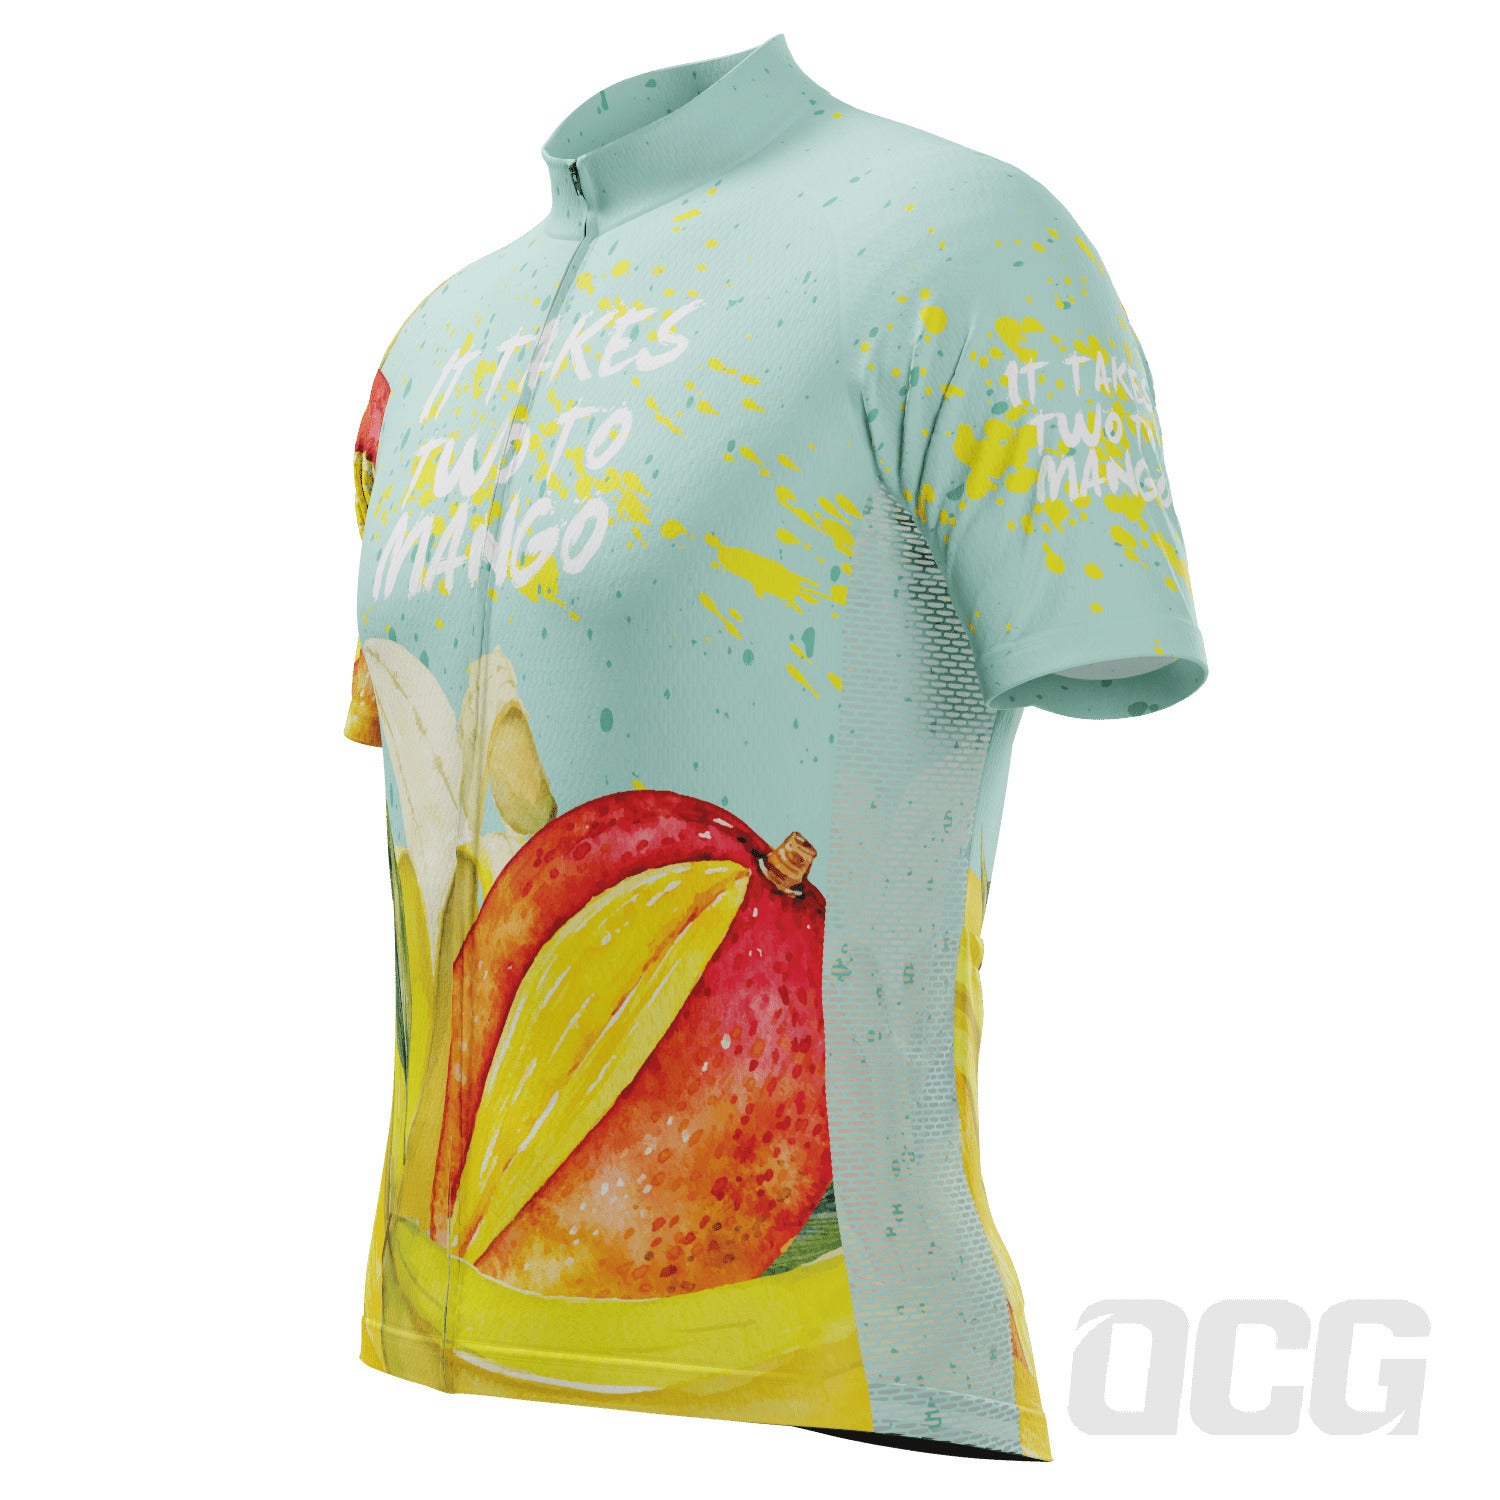 Men's It Takes Two To Mango Short Sleeve Cycling Jersey